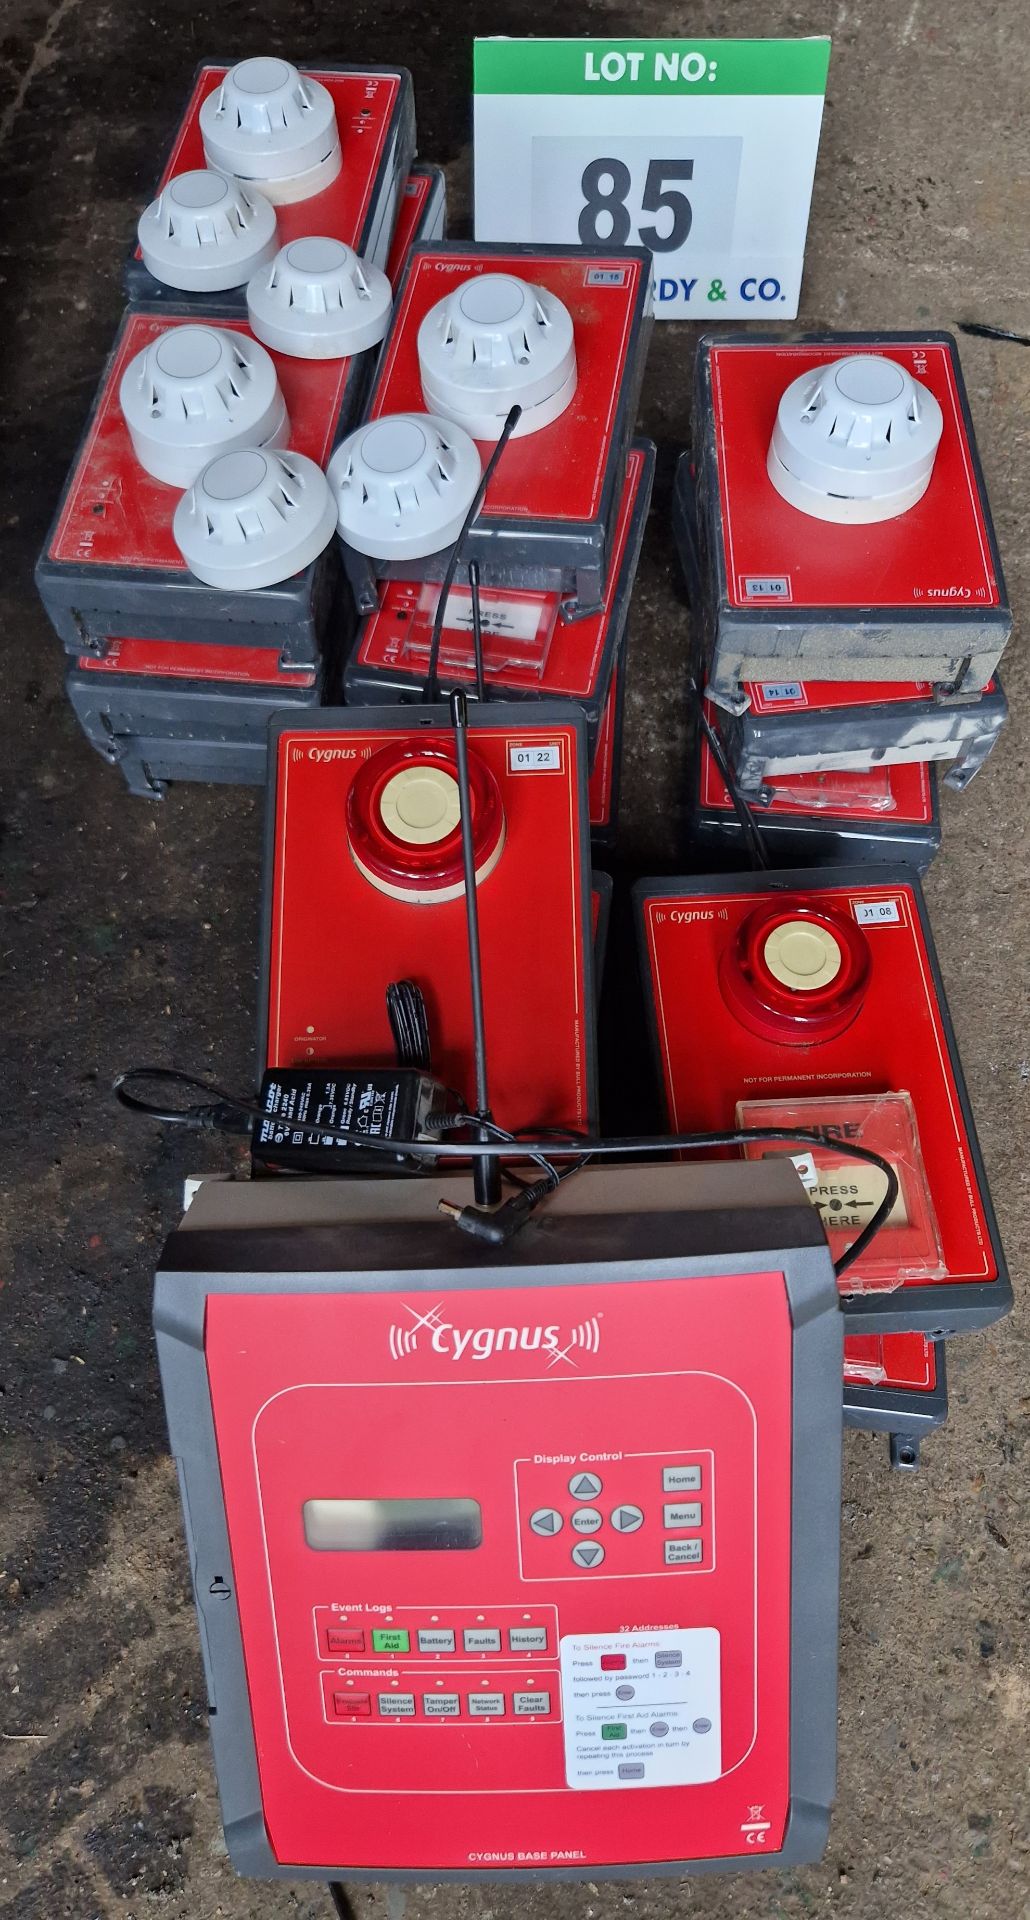 A CYGNUS Wireless Site Alarm System comprising Base Unit and Approx. Fifteen Wireless Activation